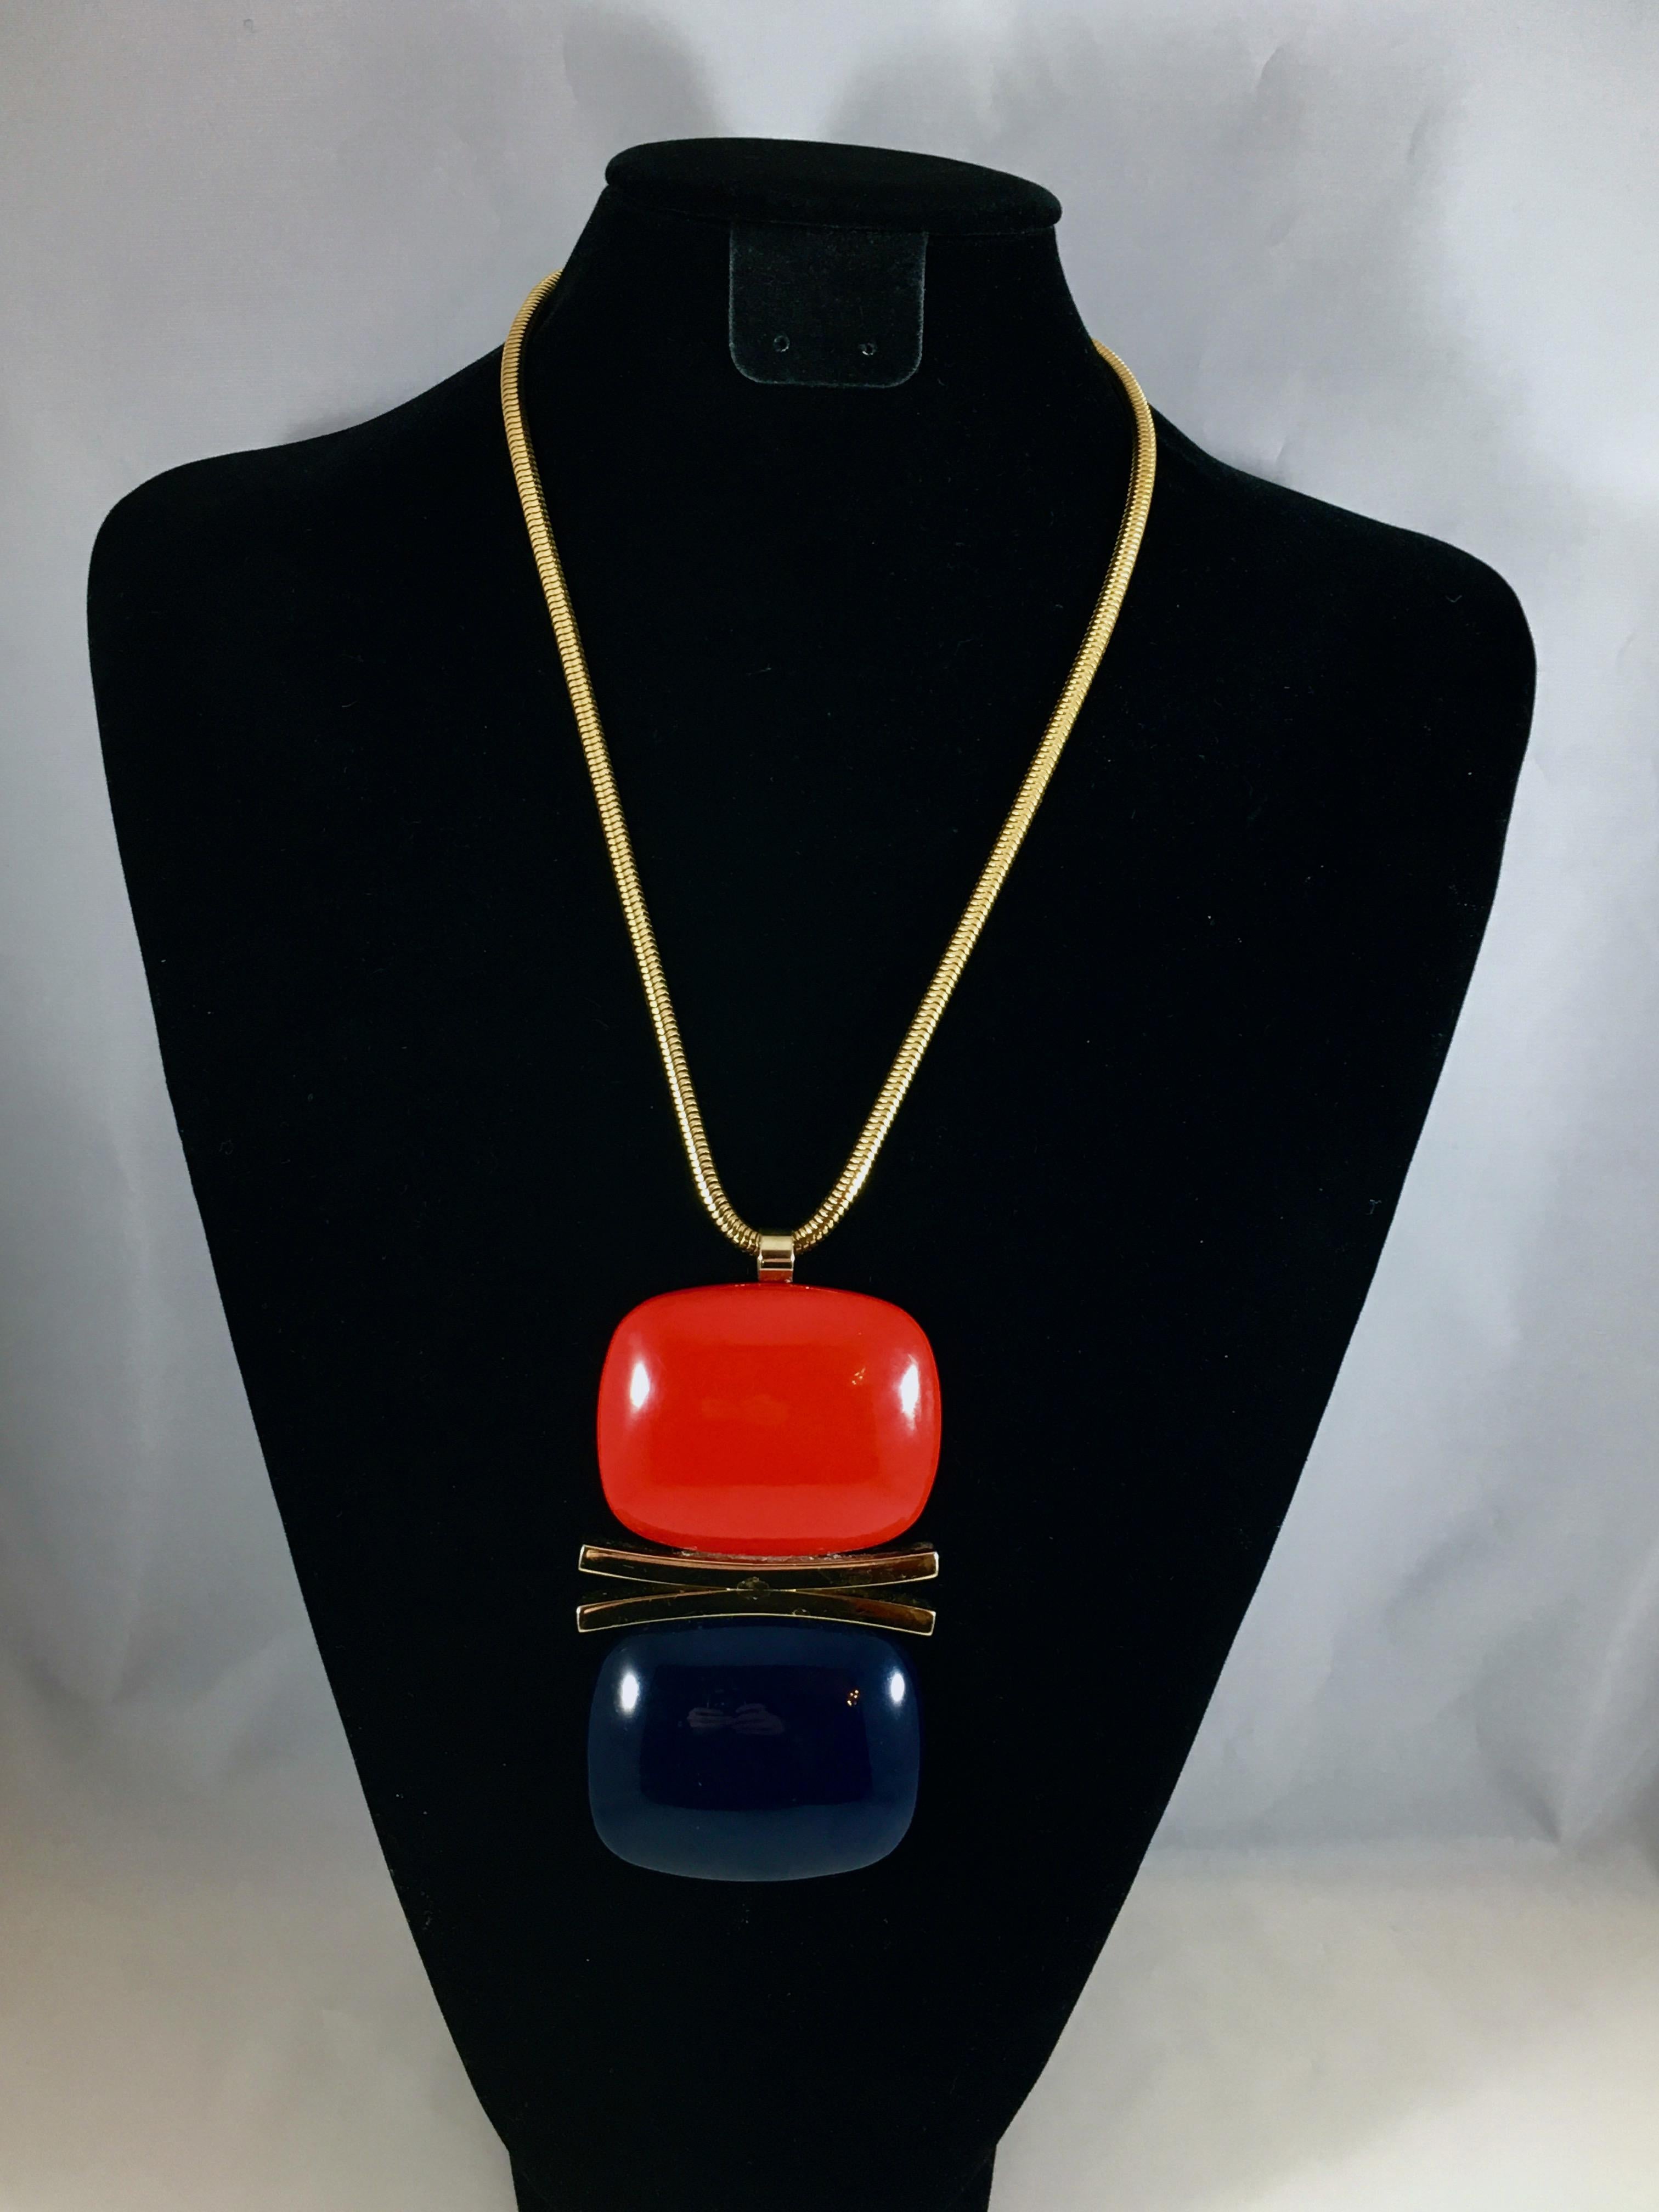 Lanvin Red and Navy Modernist Pendant Necklace, 1970s For Sale 1